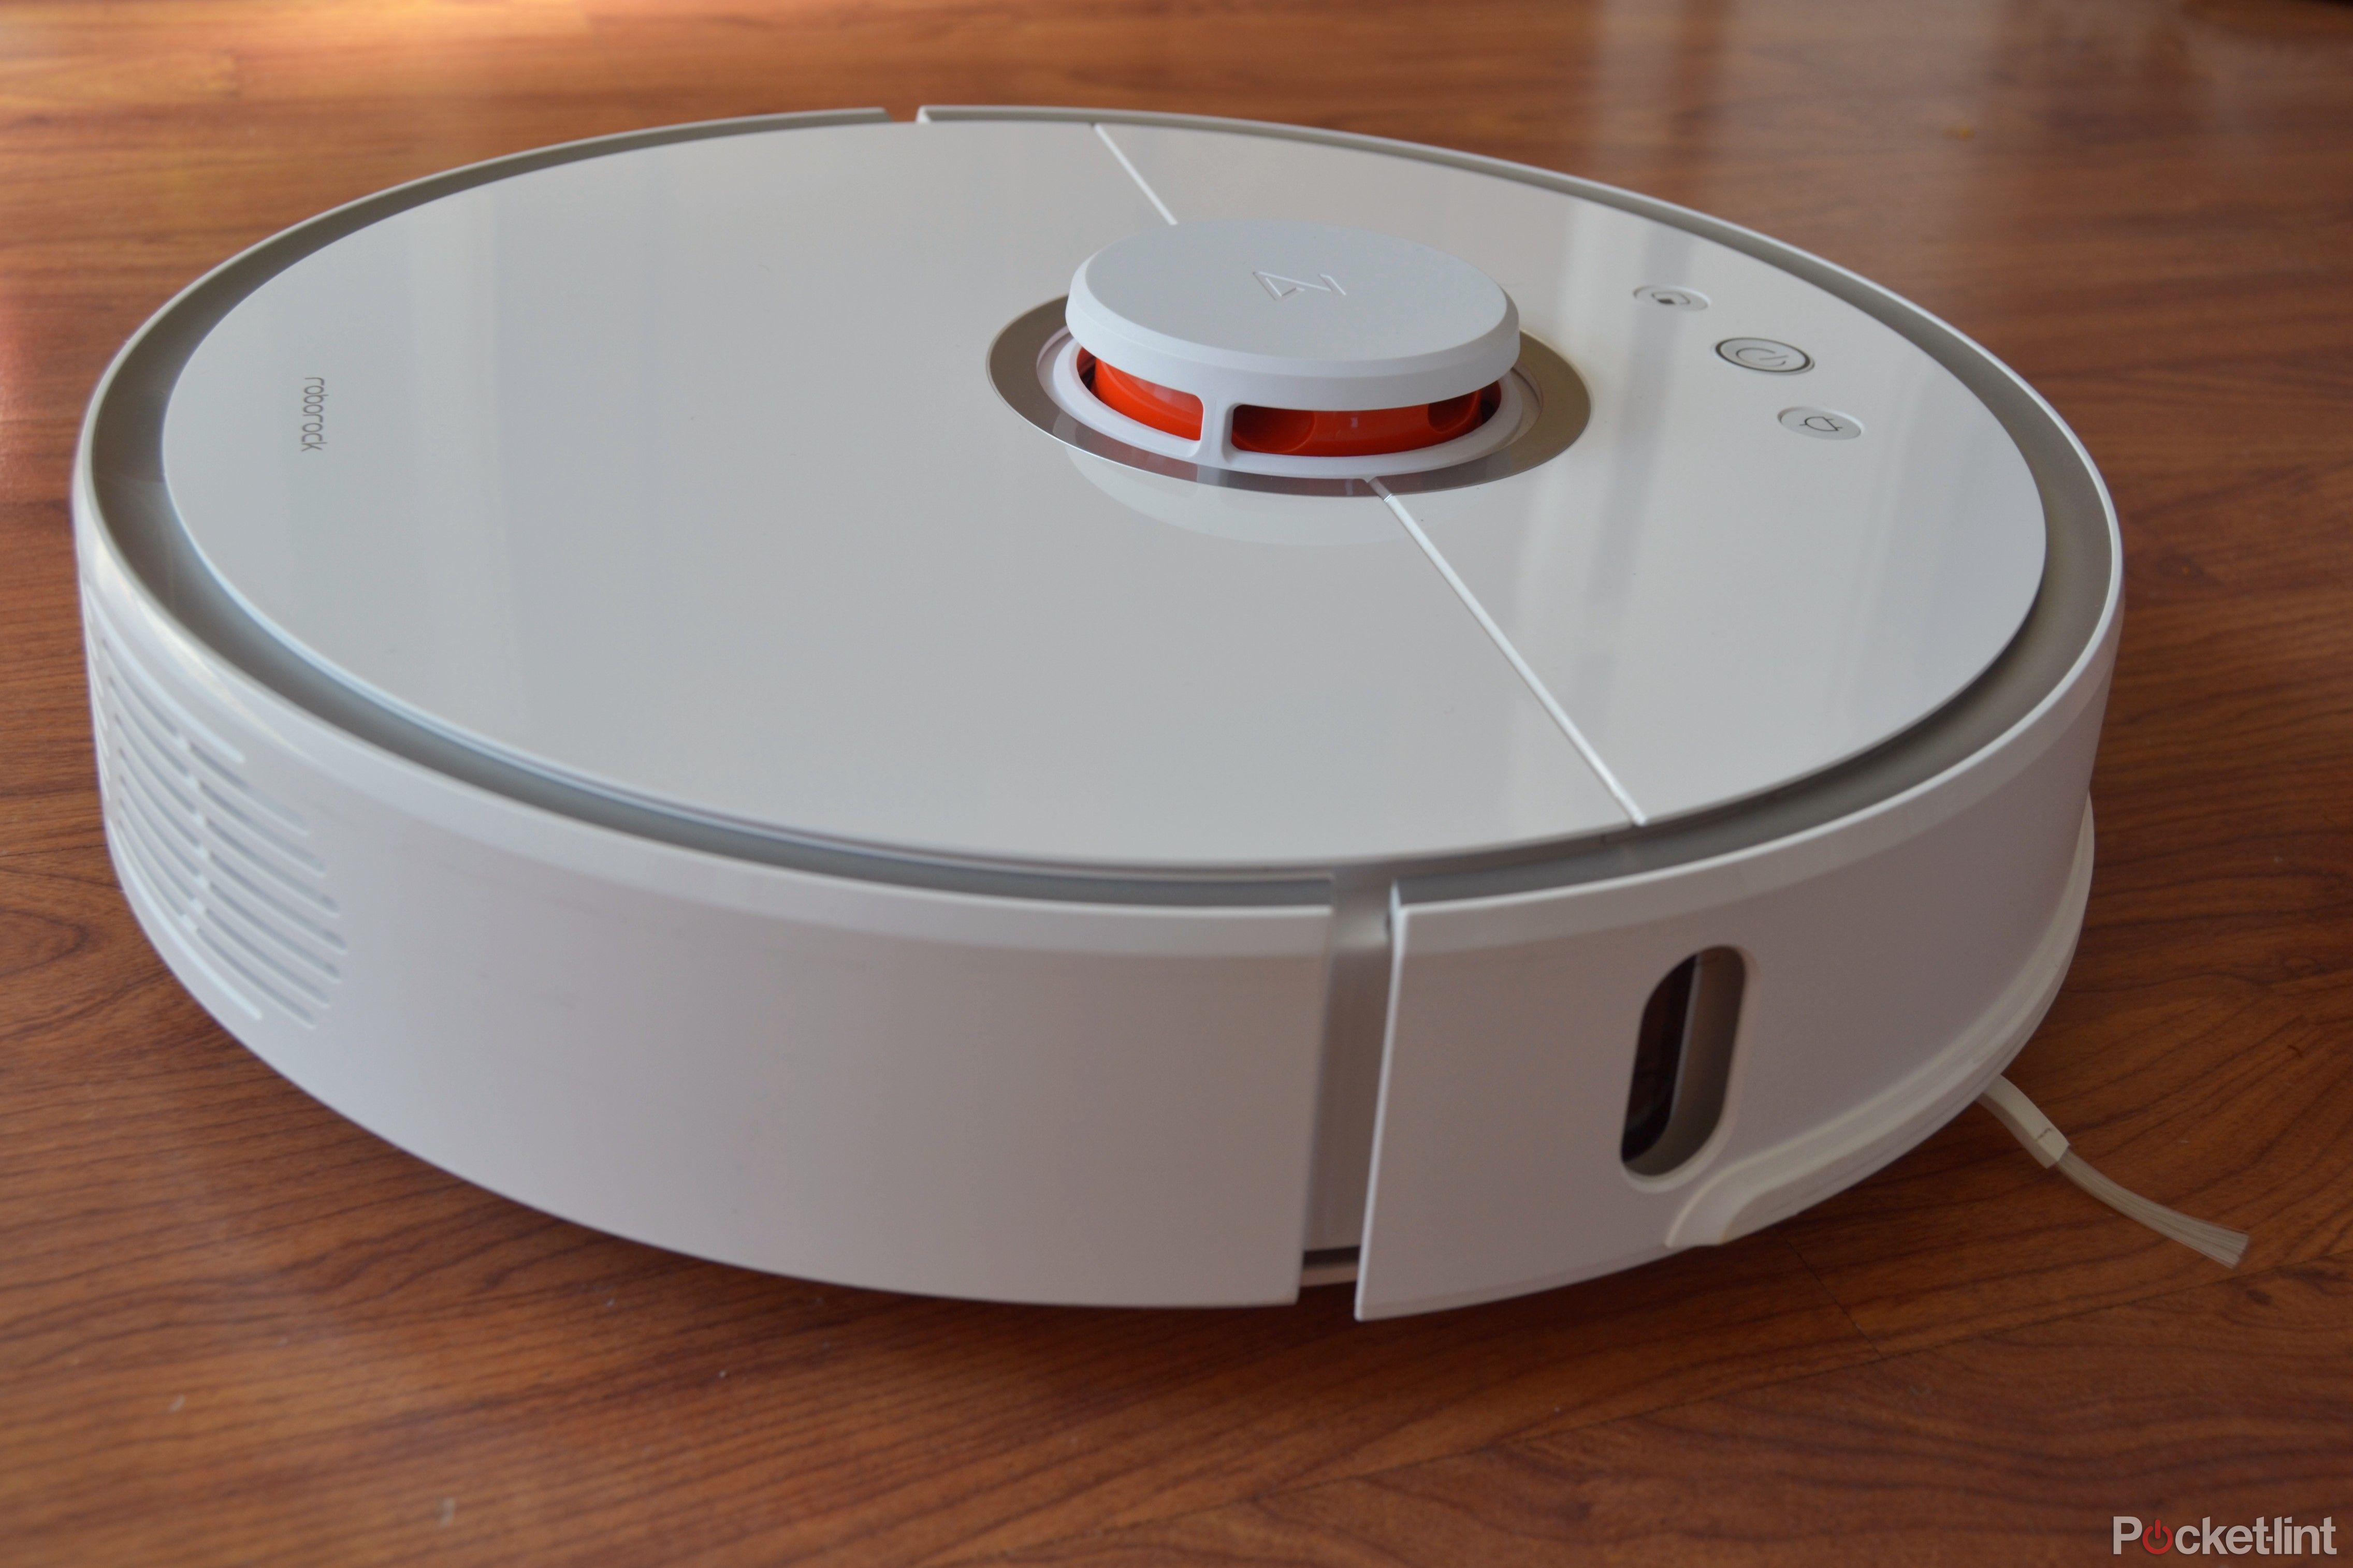 Best Robot Vacuum Cleaners 2023 All About The Tech world!